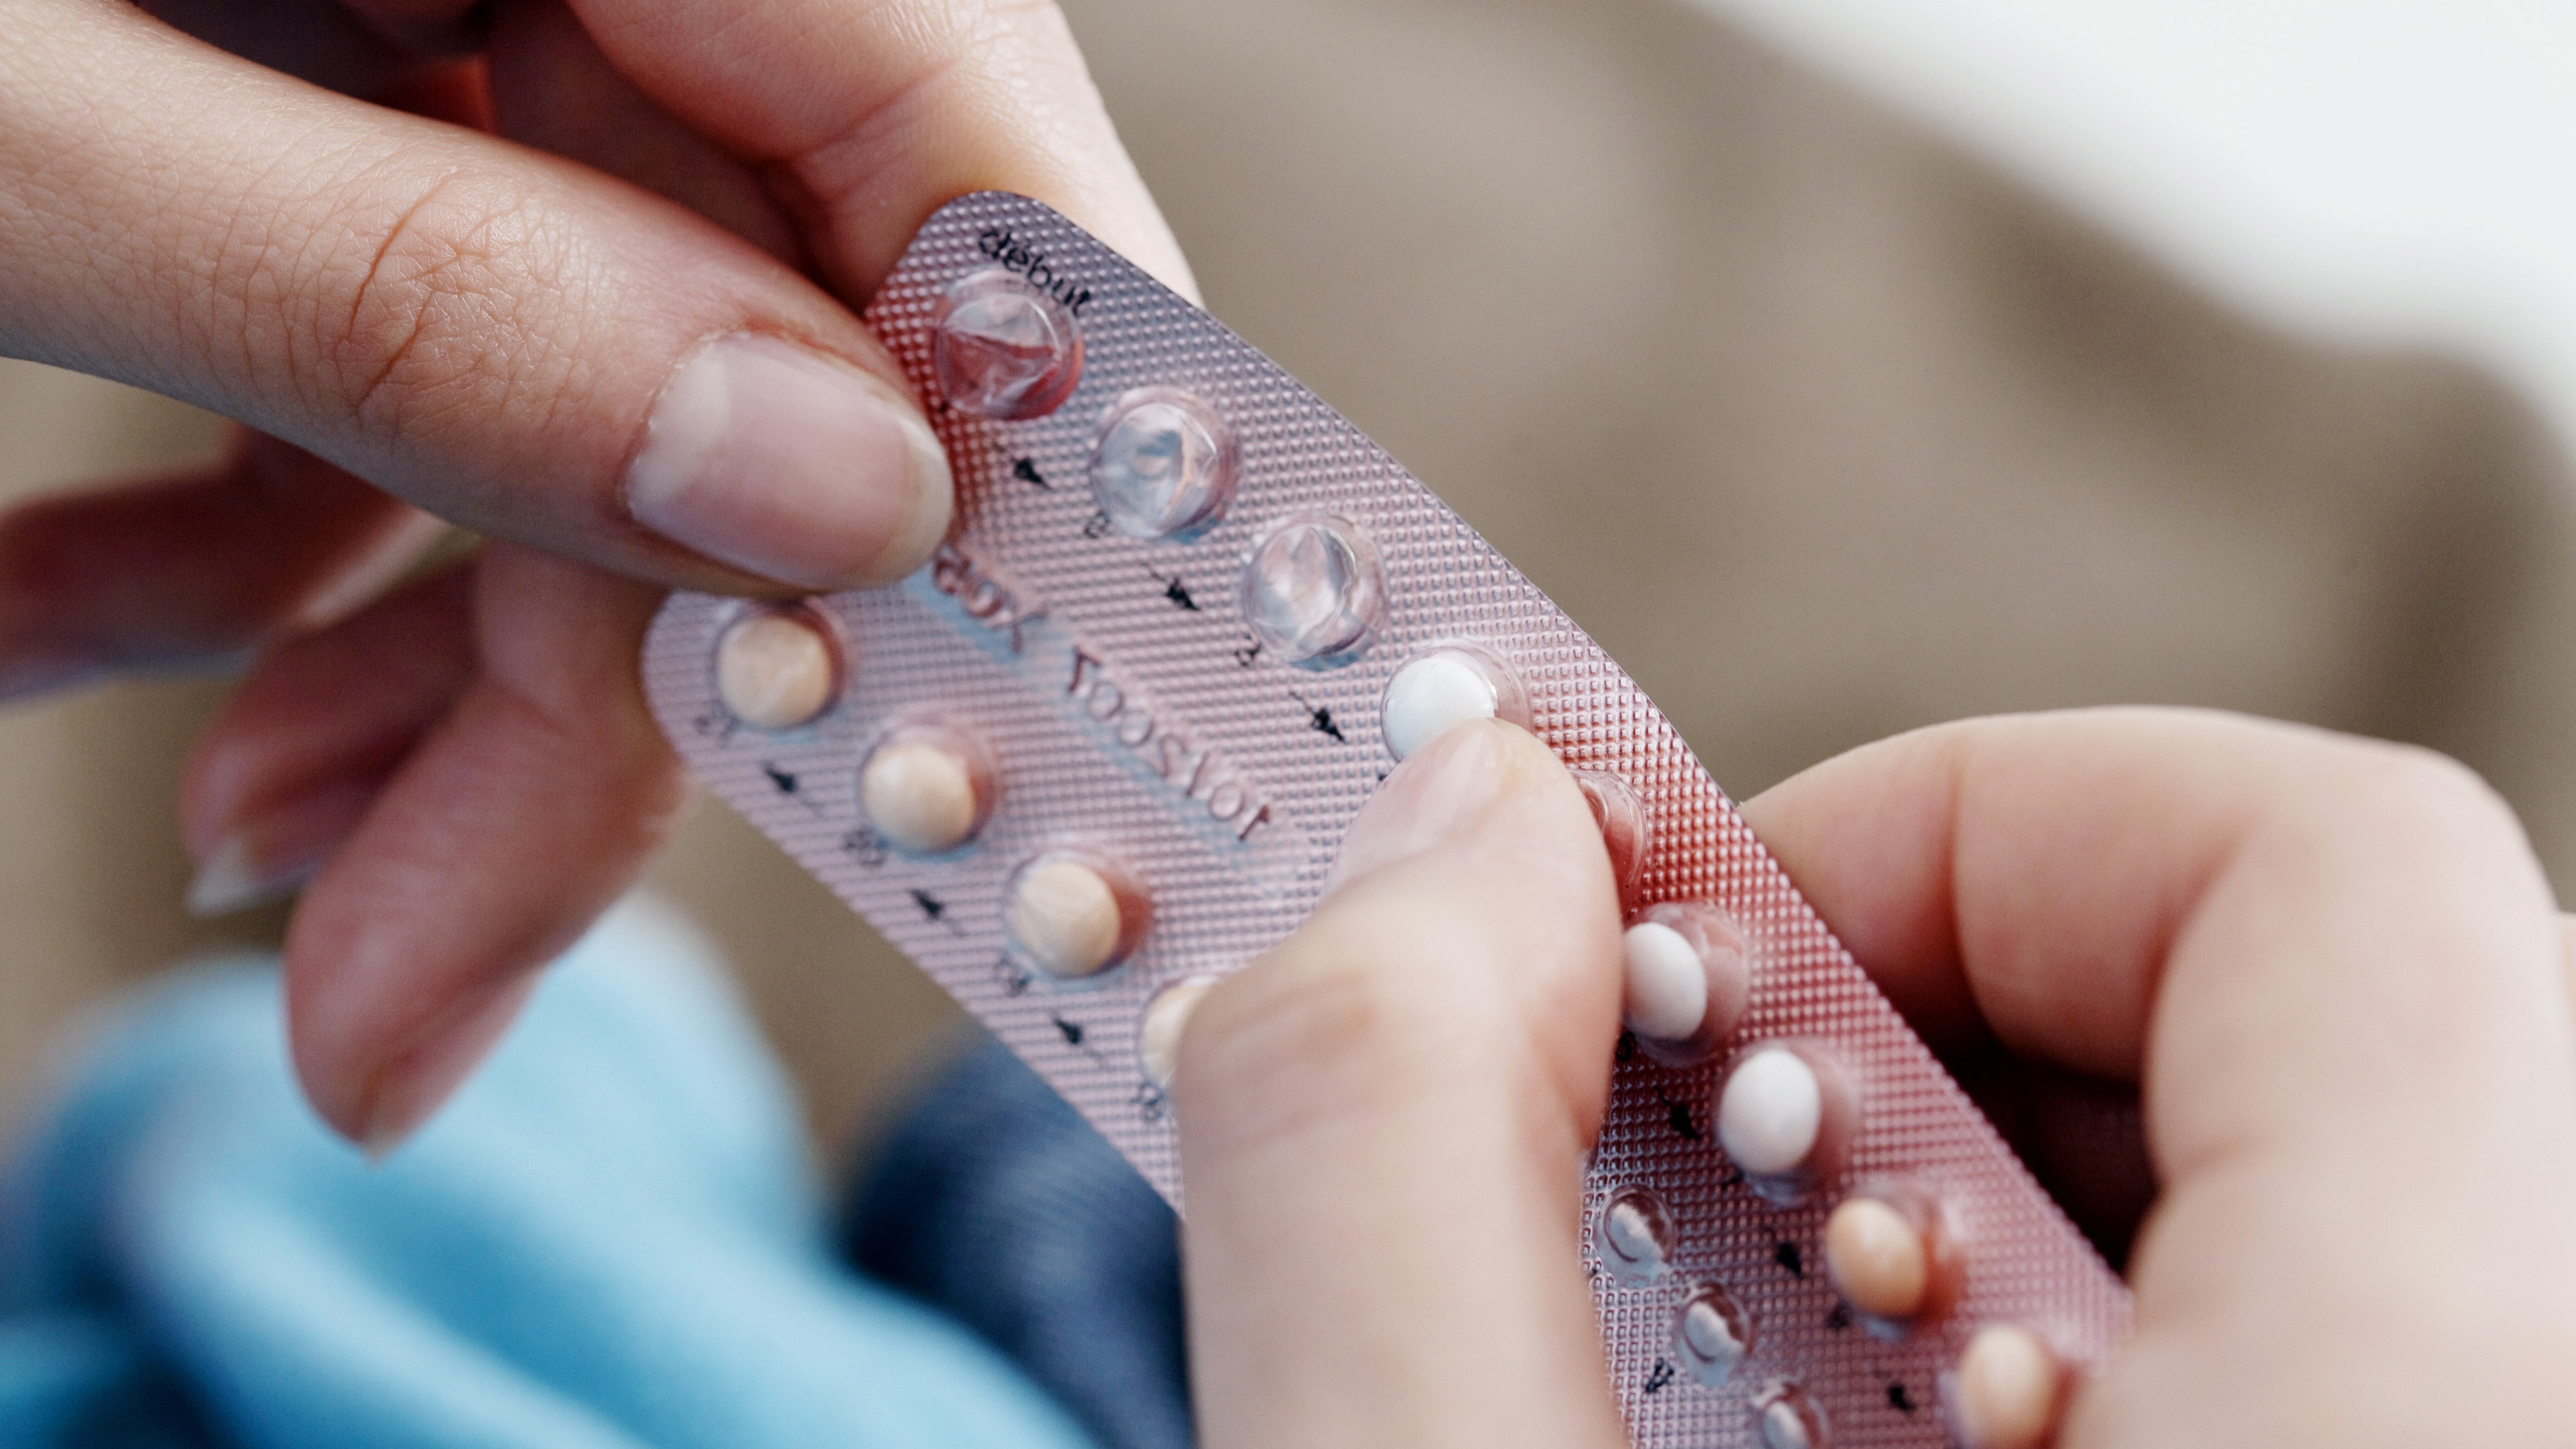 How To Choose A Birth Control Option If You’re Worried About Side Effects